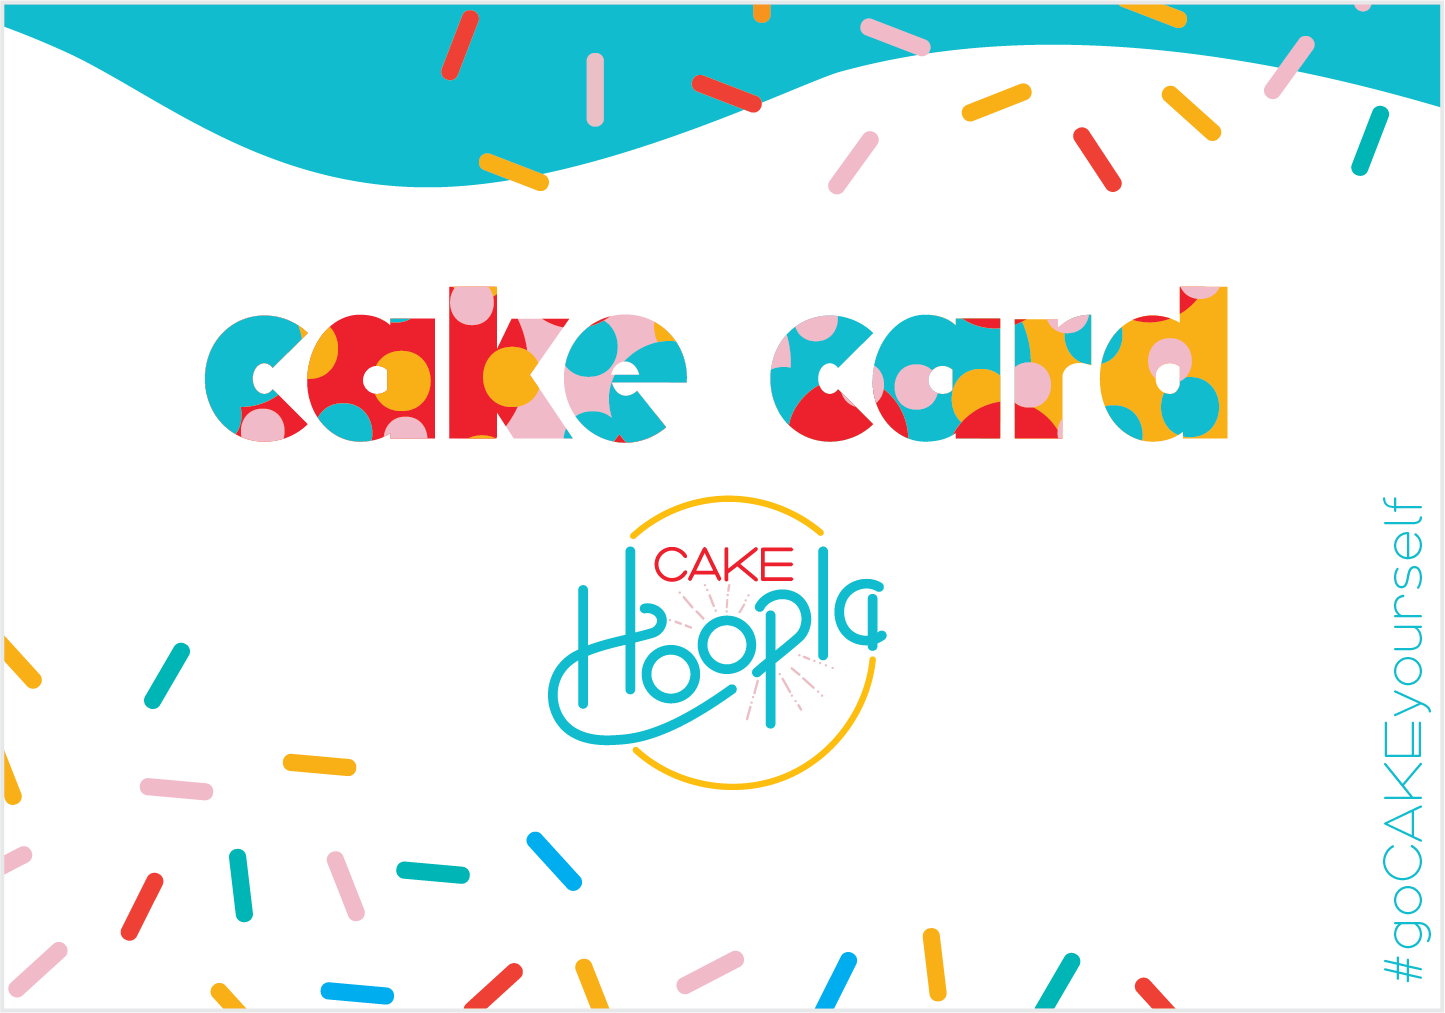 A white rectangular card reads in thick, bold lettering "cake card" in the center. The lettering is a combination of teal, pink, yellow, and red and sprinkles of the same colors cascade from the top of the card. A Cake Hoopla logo is beneath "cake card," and in a thin teal font along the right side of the card is the hashtag "goCAKEyourself."